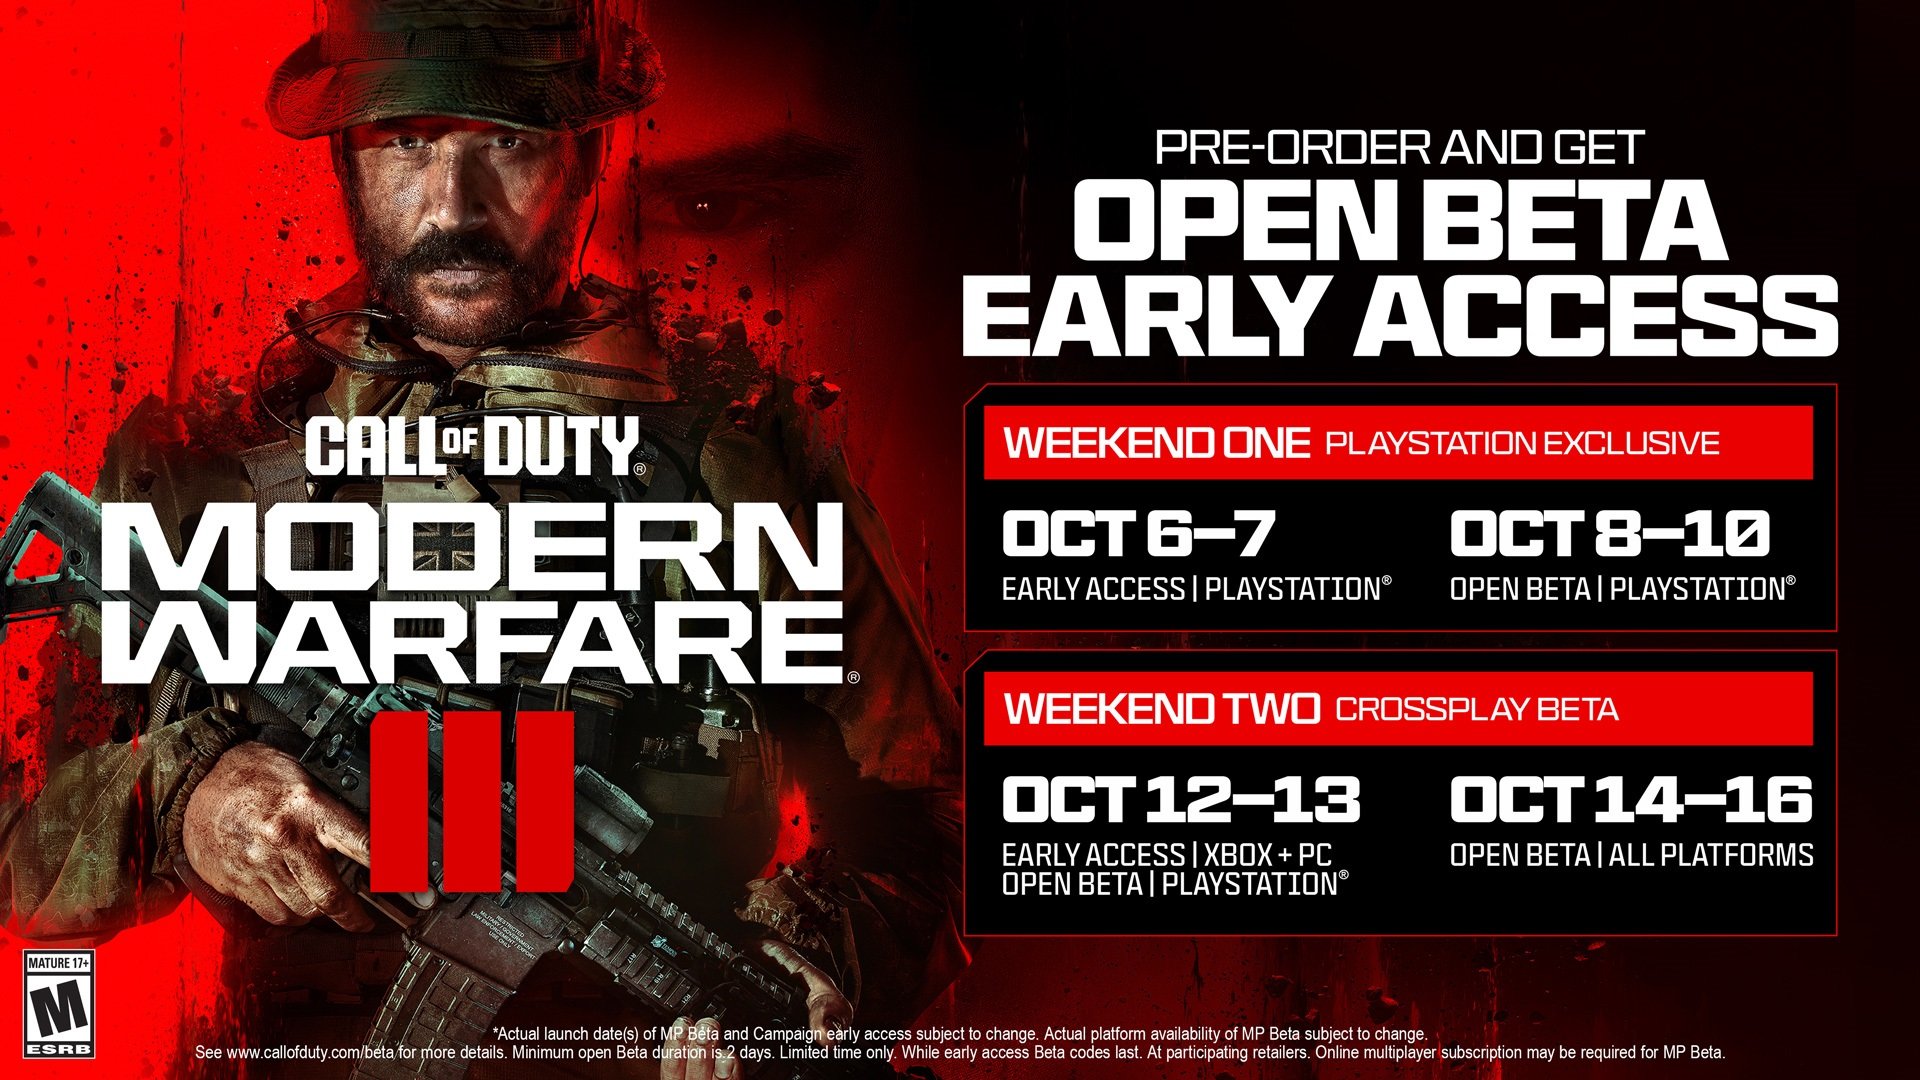 The Modern Warfare 3 multiplayer beta dates have been announced VGC